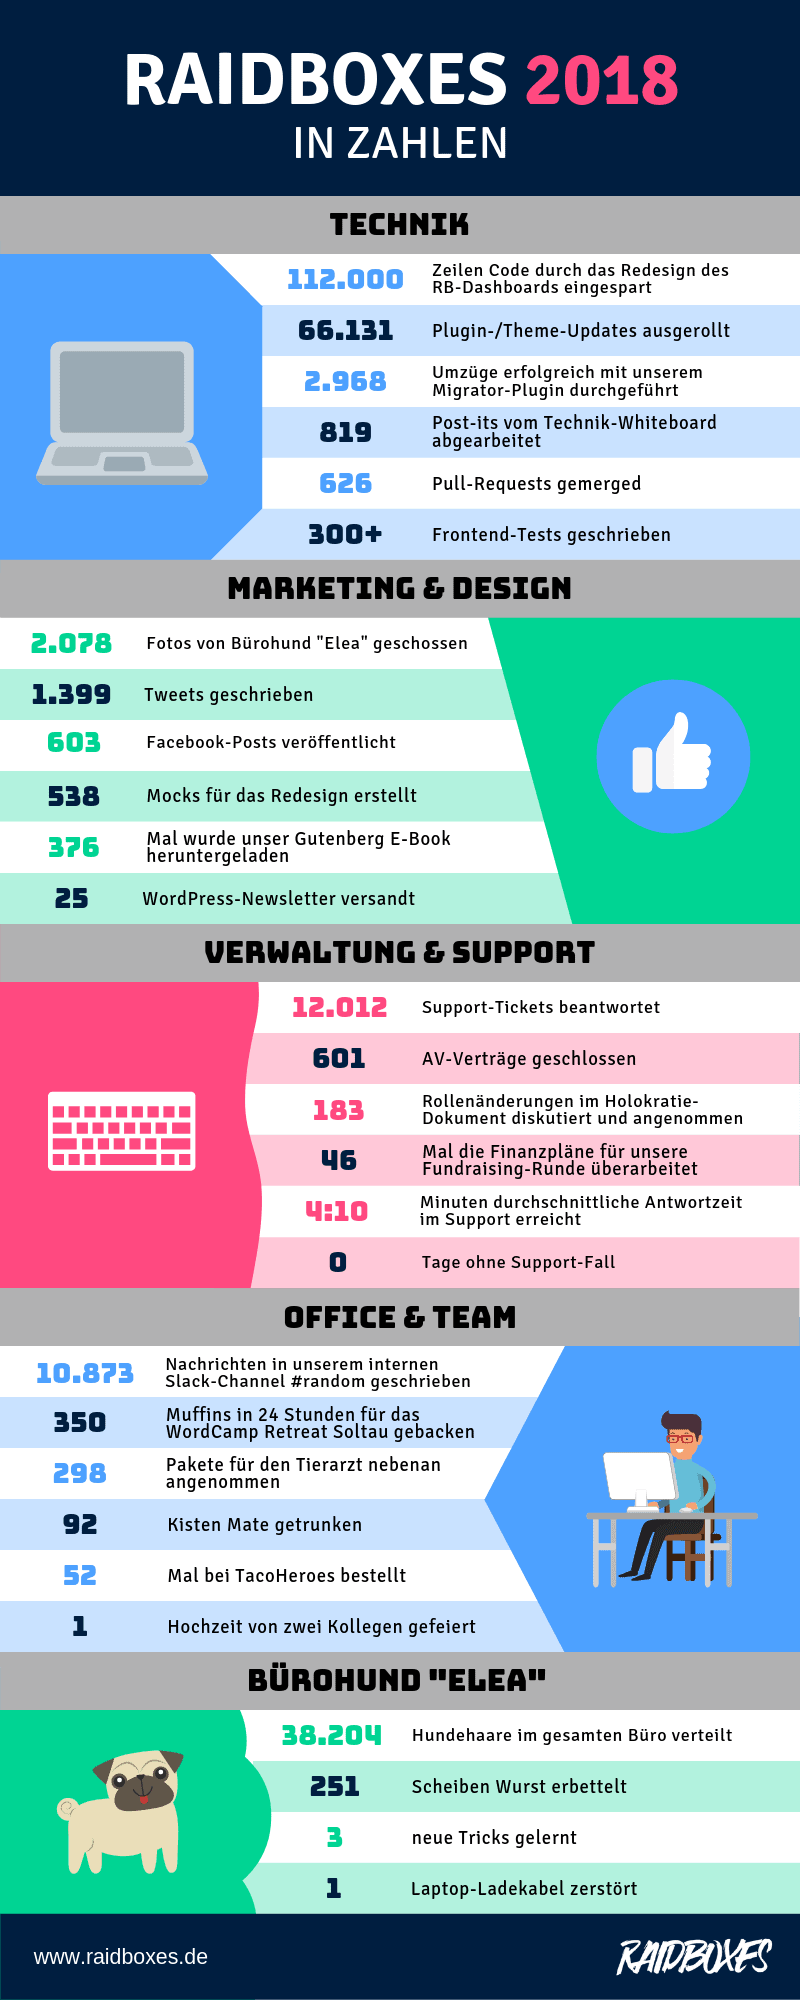 Infographic RB 2018 in cijfers